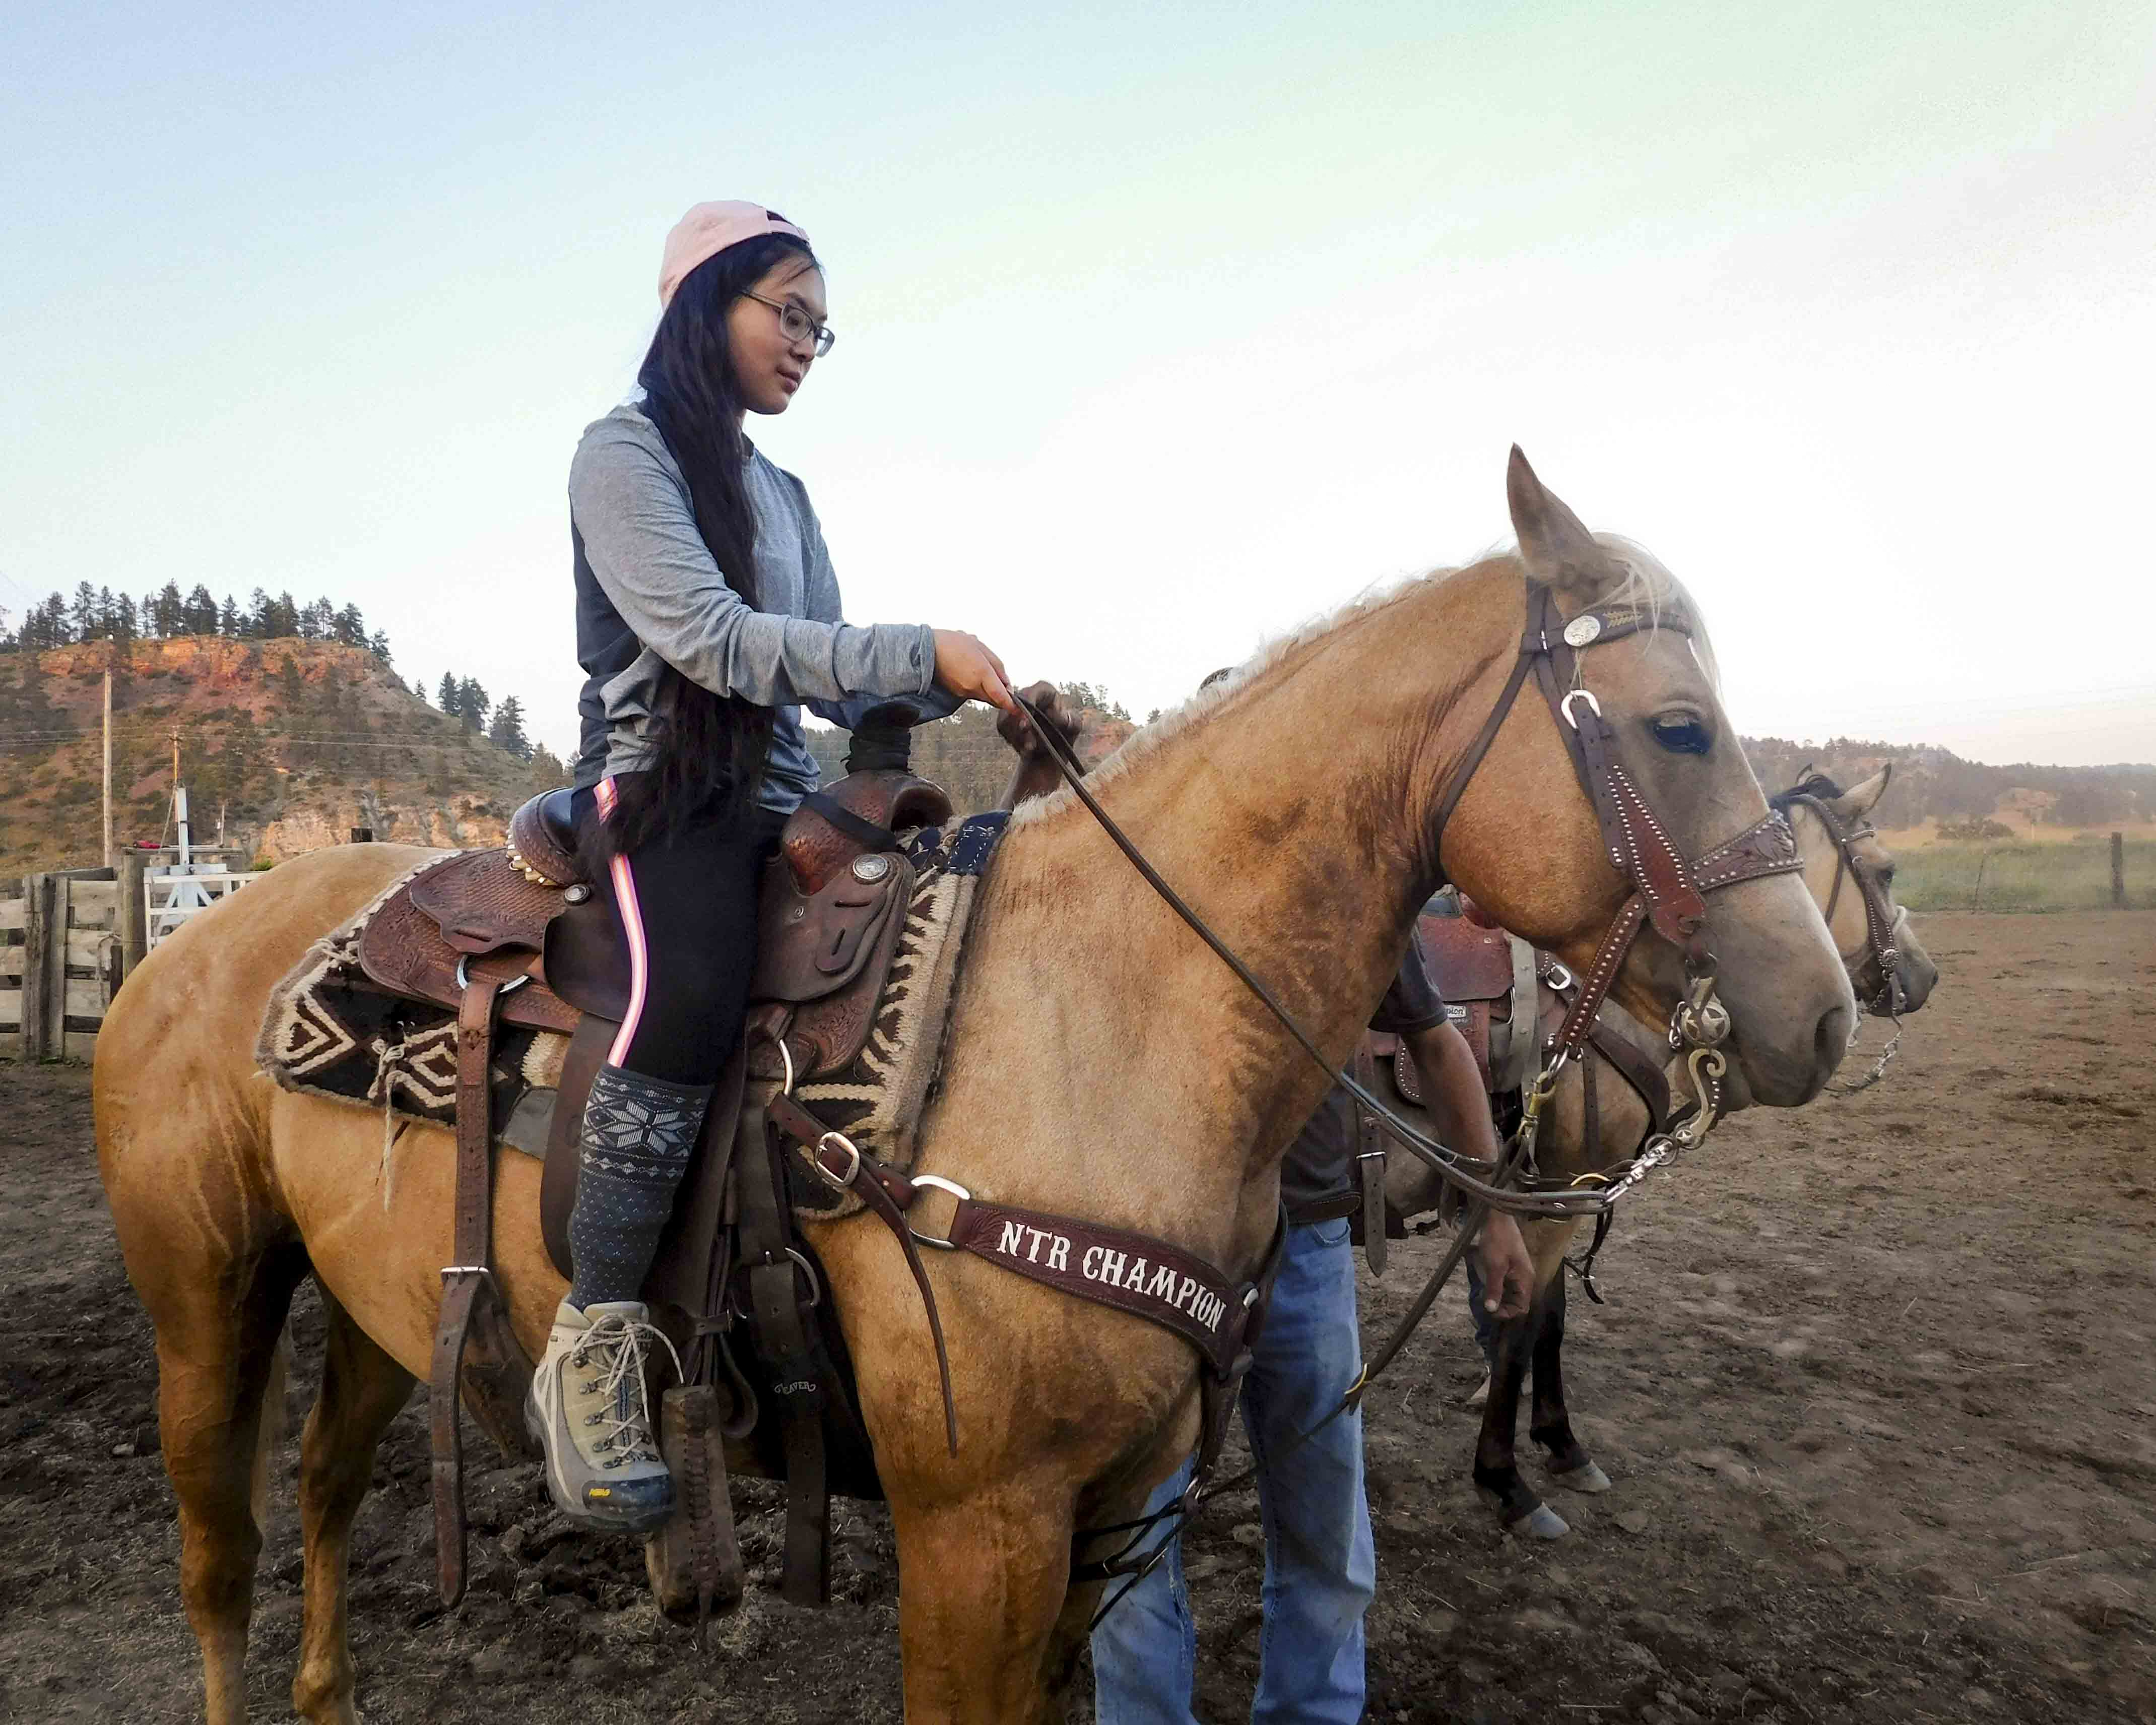 Teenage girl rides horse for the first time on community service trips to the Northern Cheyenne